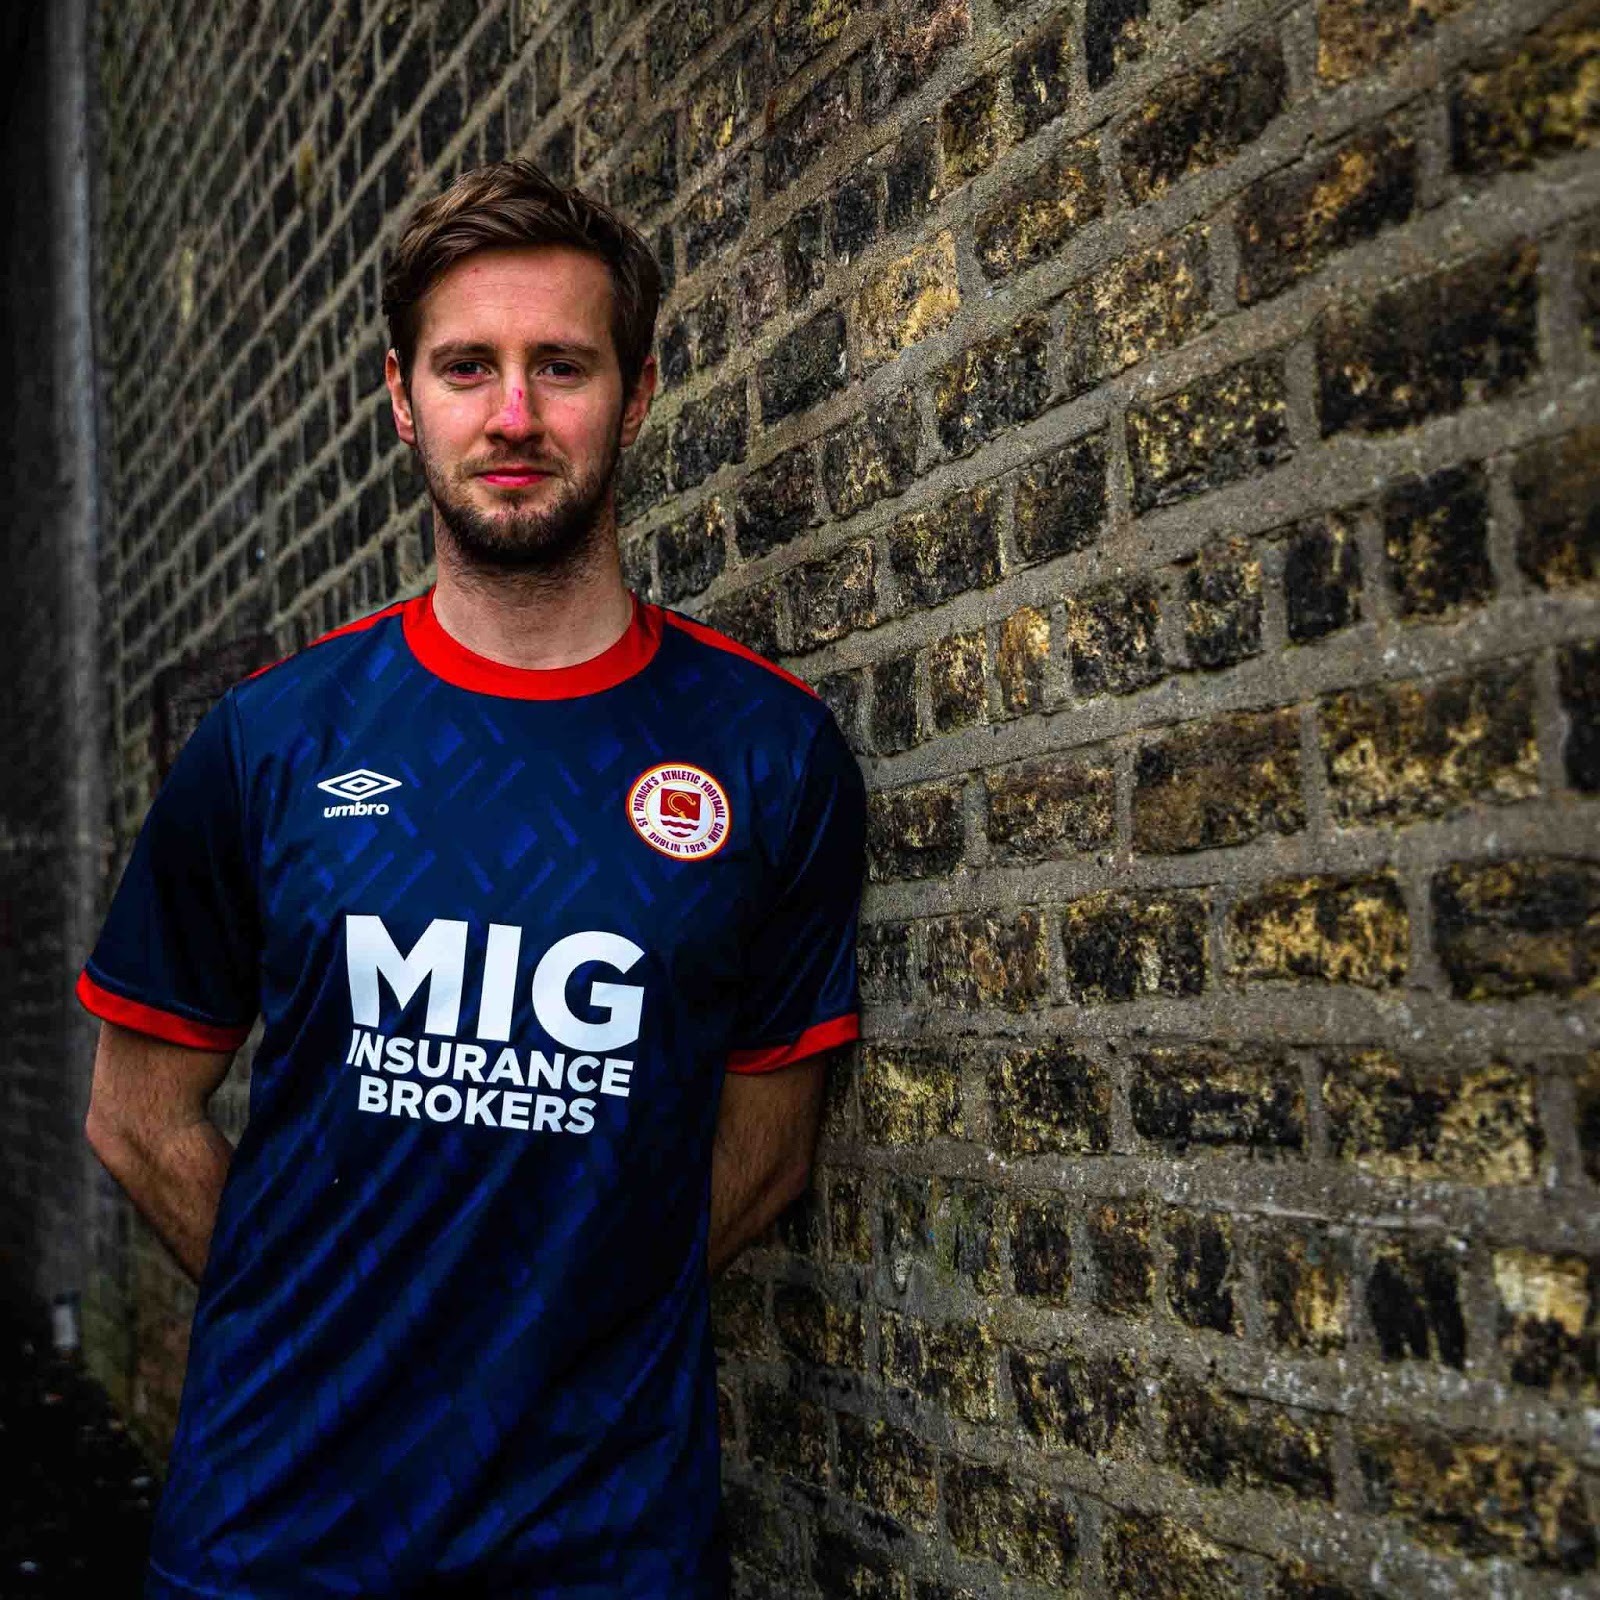 St Patrick's Athletic 2021 Home & Away Kits Released - Footy Headlines